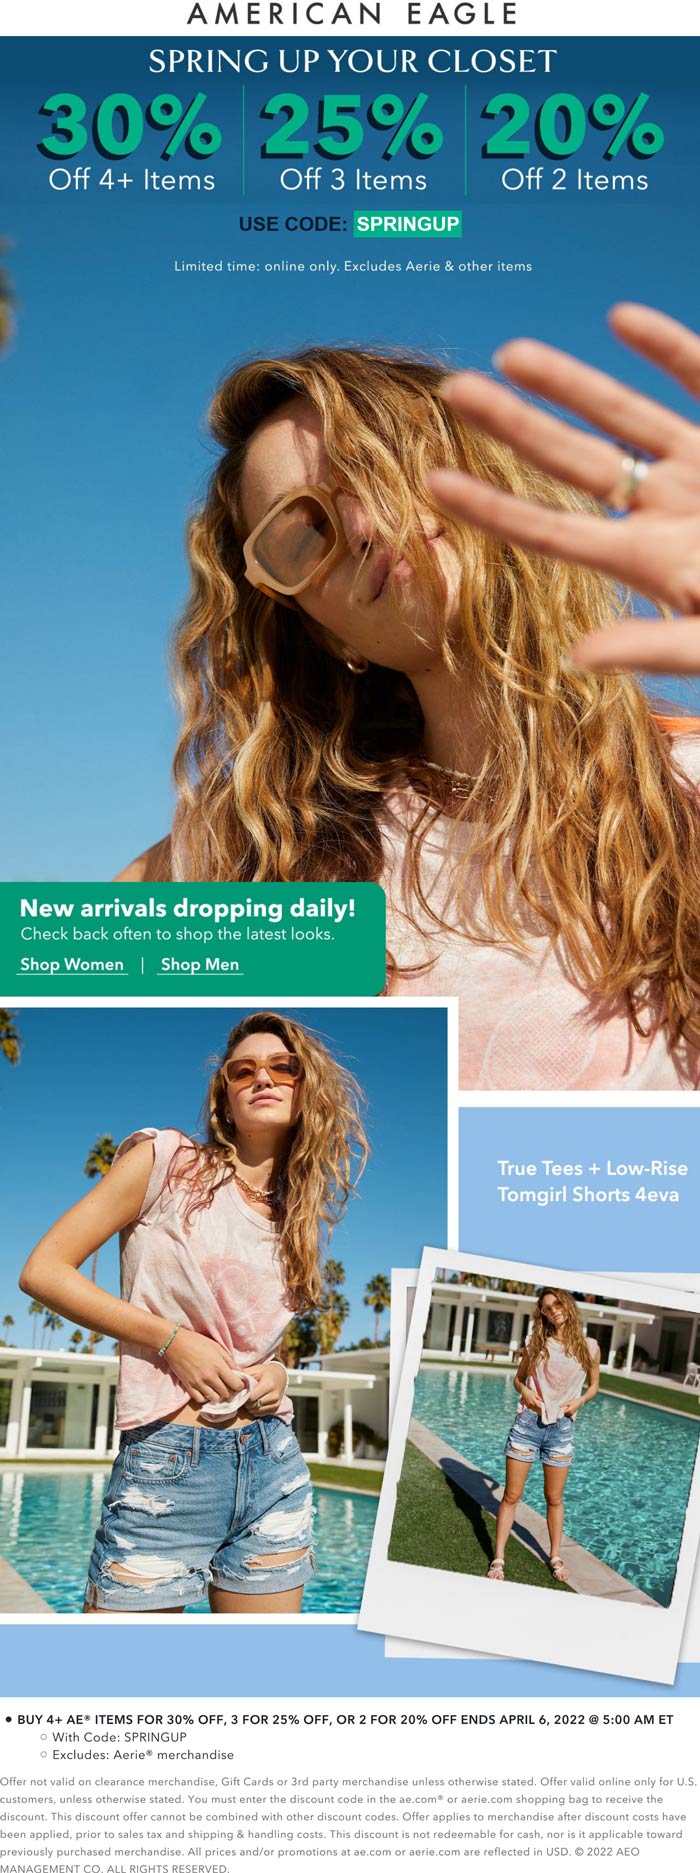 American Eagle stores Coupon  20-30% off 2+ items at American Eagle via promo code SPRINGUP #americaneagle 